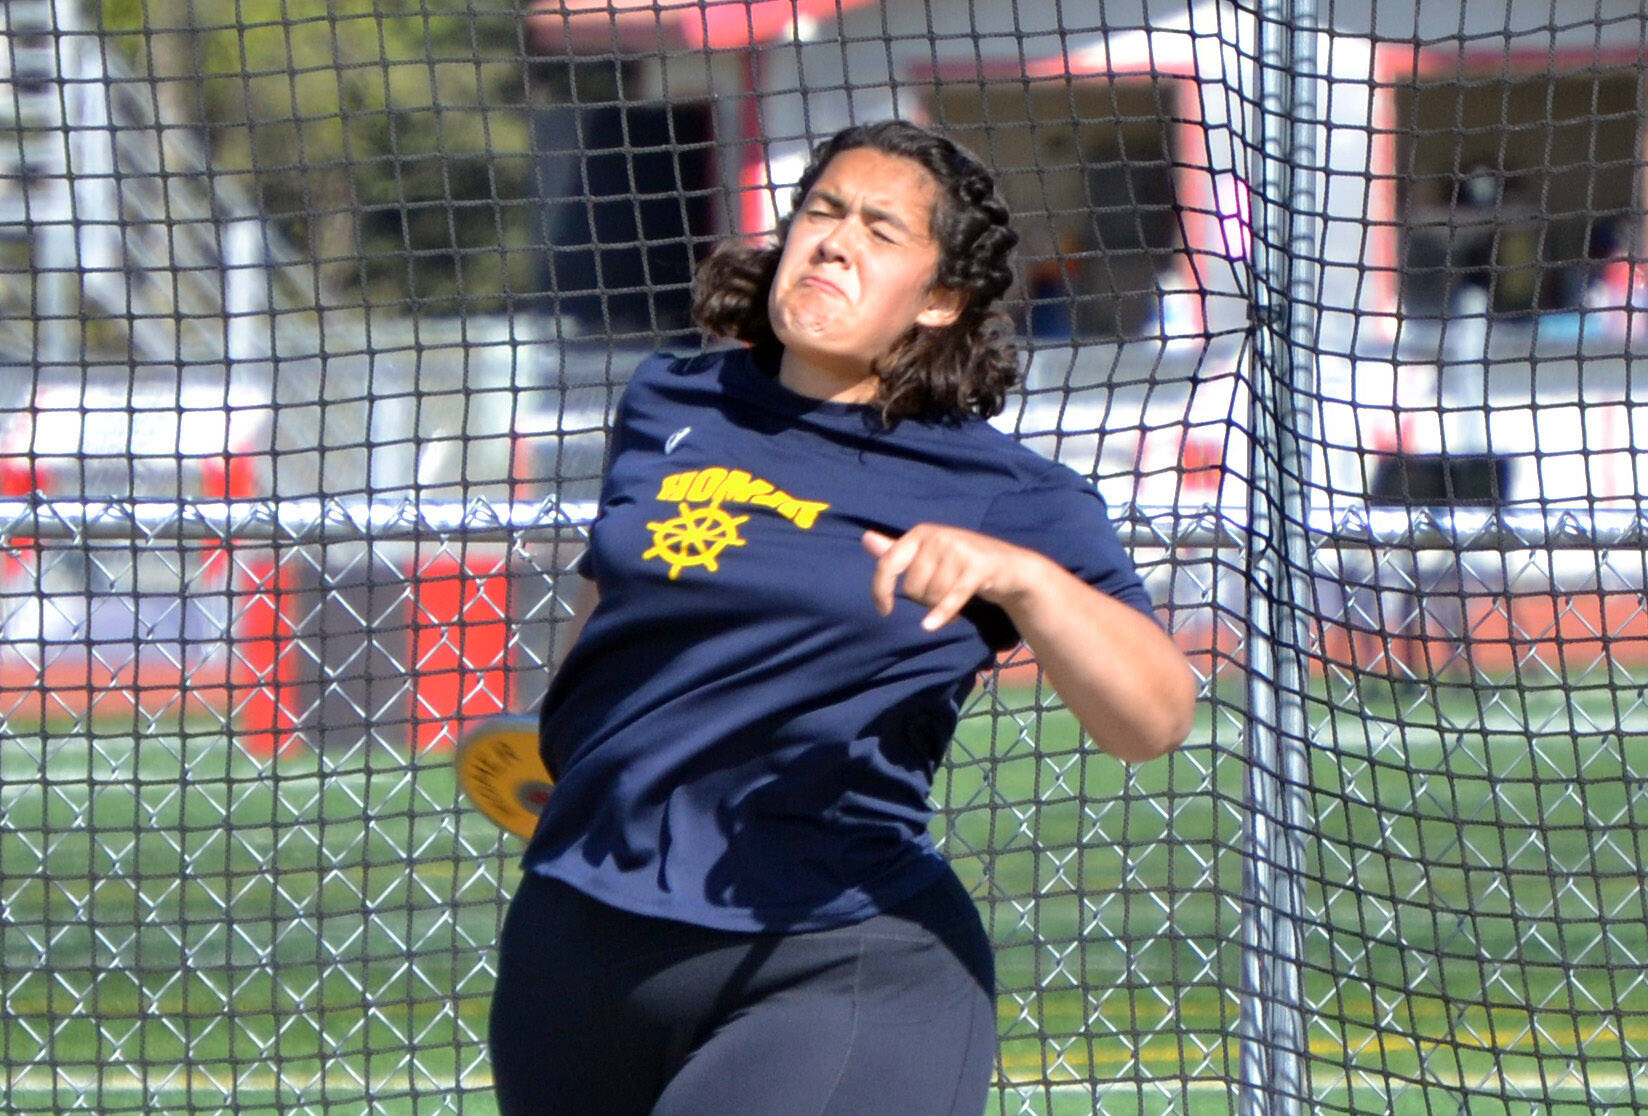 Homer’s Auden Cress throws the discus at the Region 3/Division II meet Friday, May 20, 2022, at Ed Hollier Field at Kenai Central High School in Kenai, Alaska. (Photo by Jeff Helminiak/Peninsula Clarion)